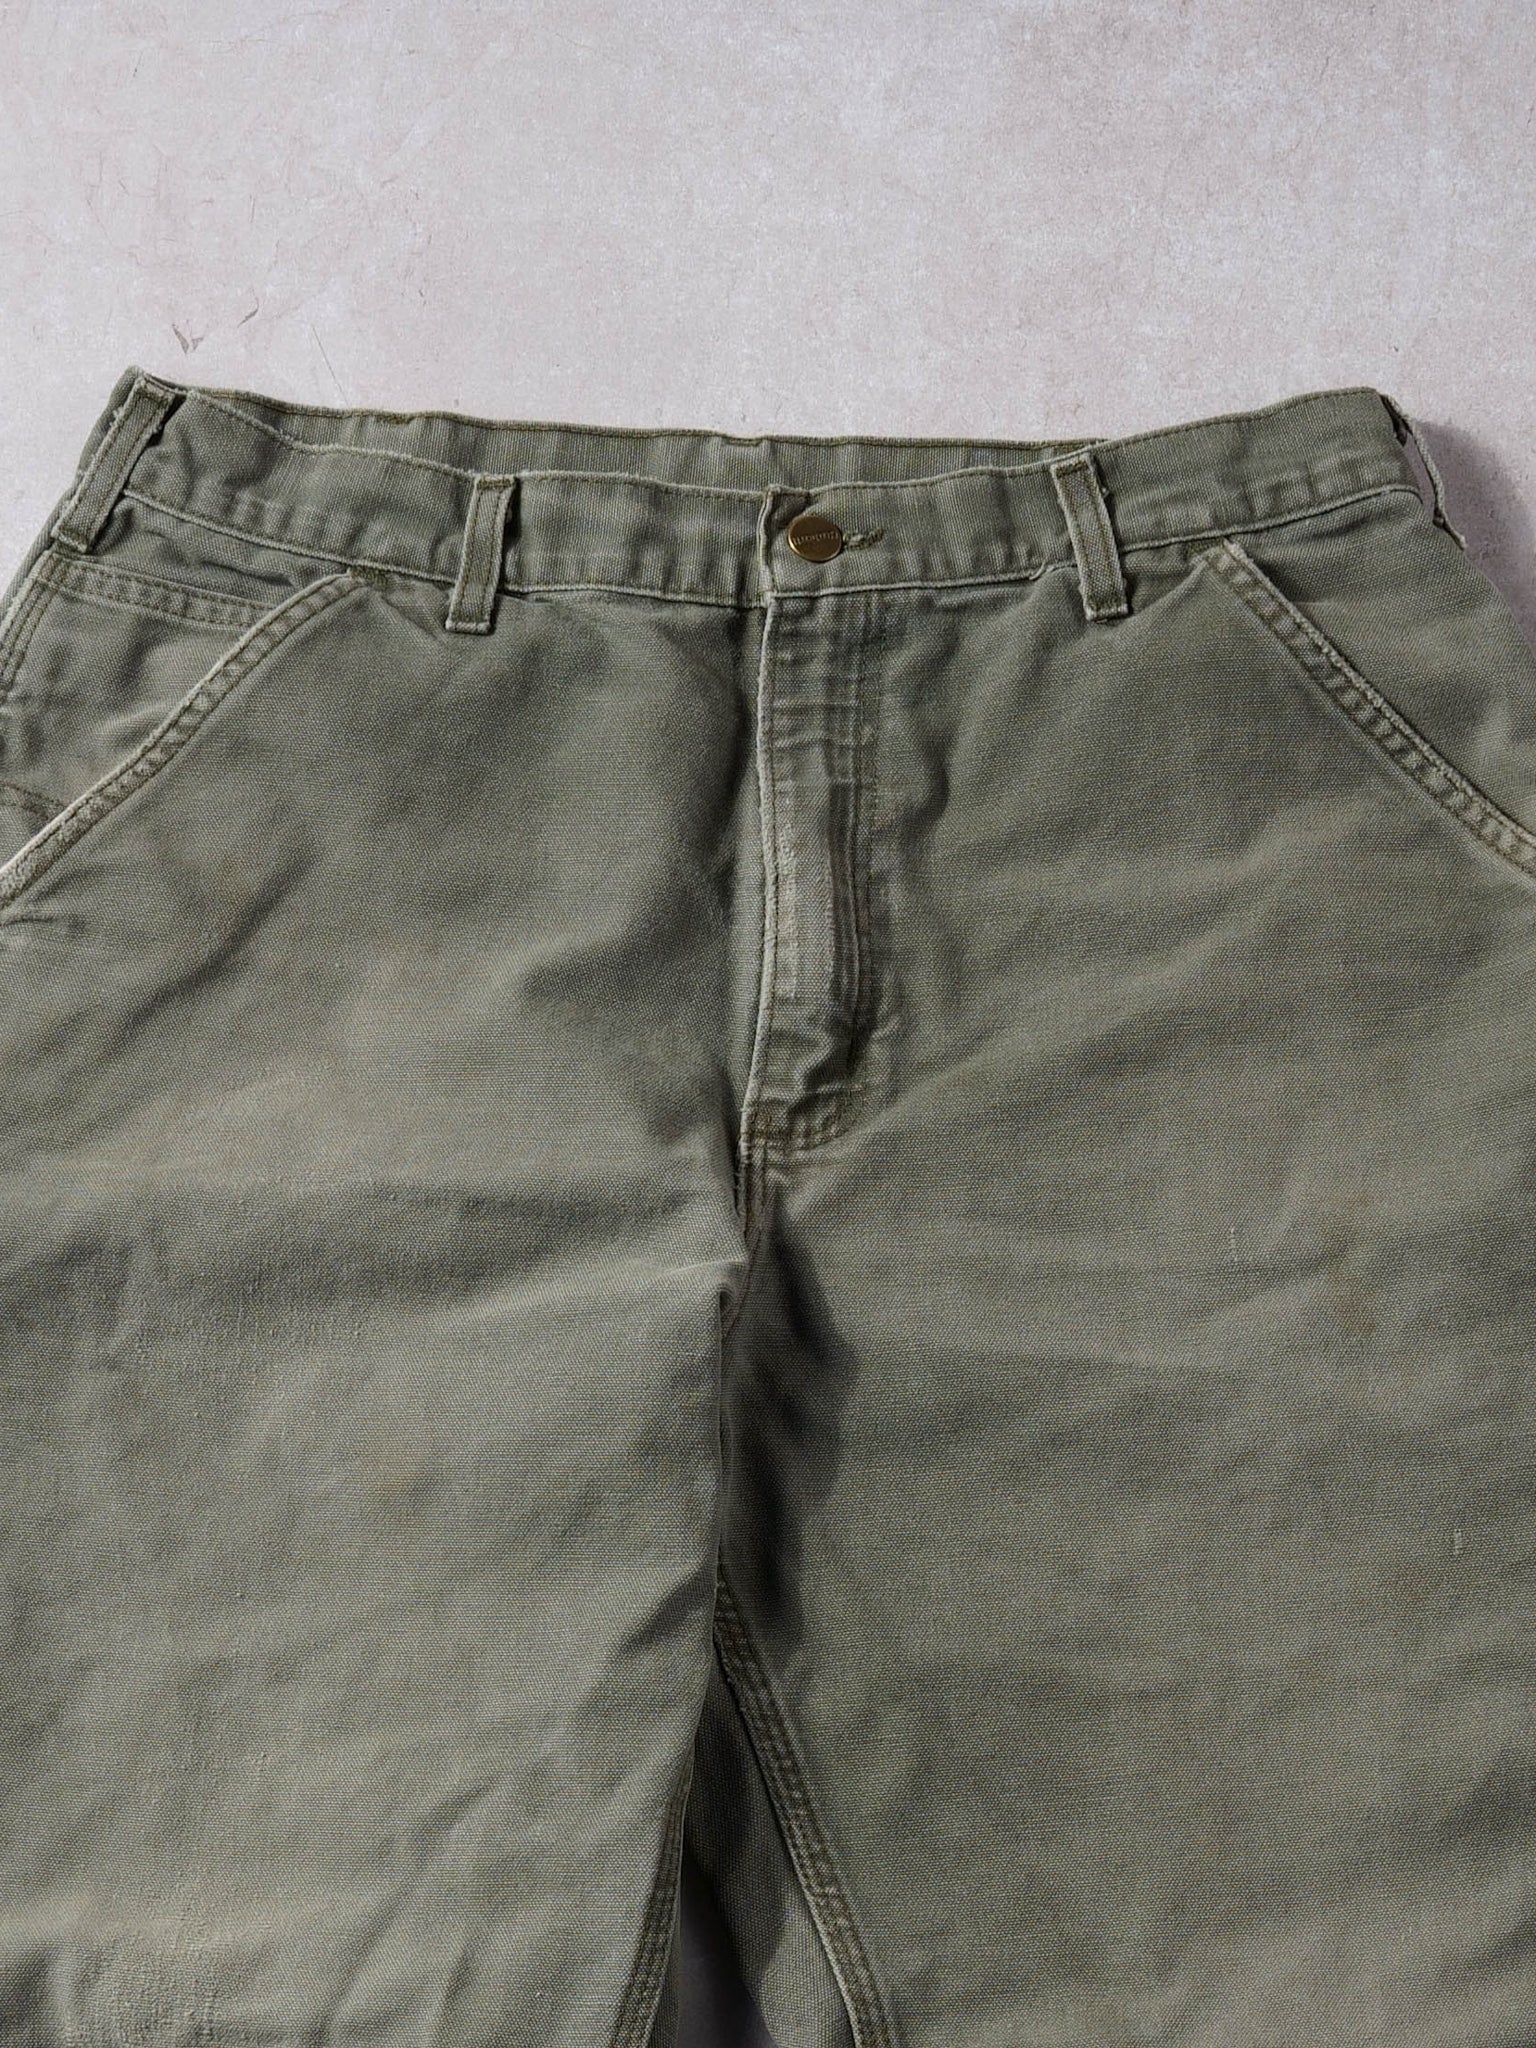 Vintage 90s Carhartt washed Green Dungeree Fit Carpenter Pants (34x32)